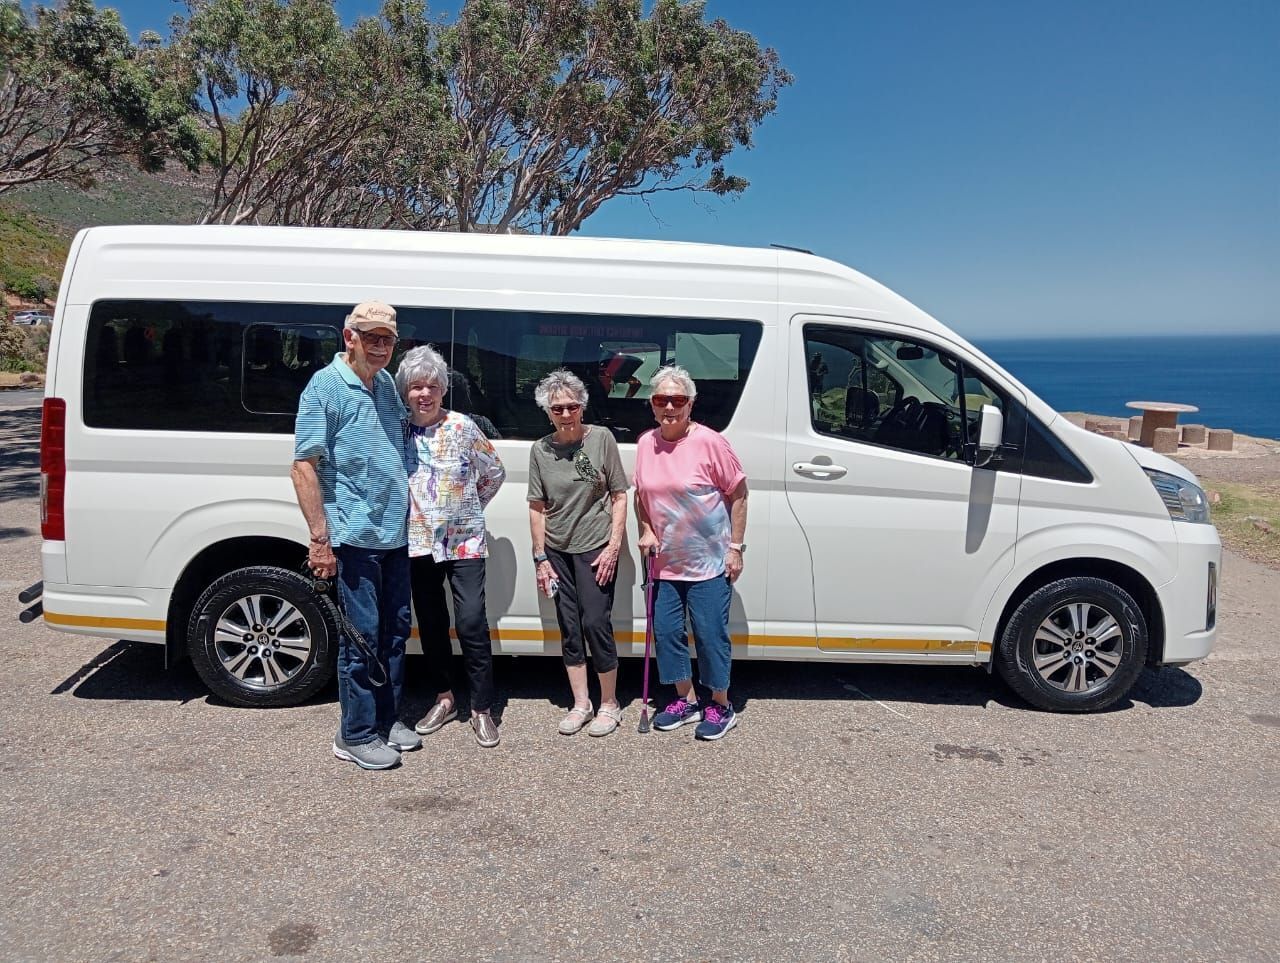 A group of people are posing for a picture in front of a white van.